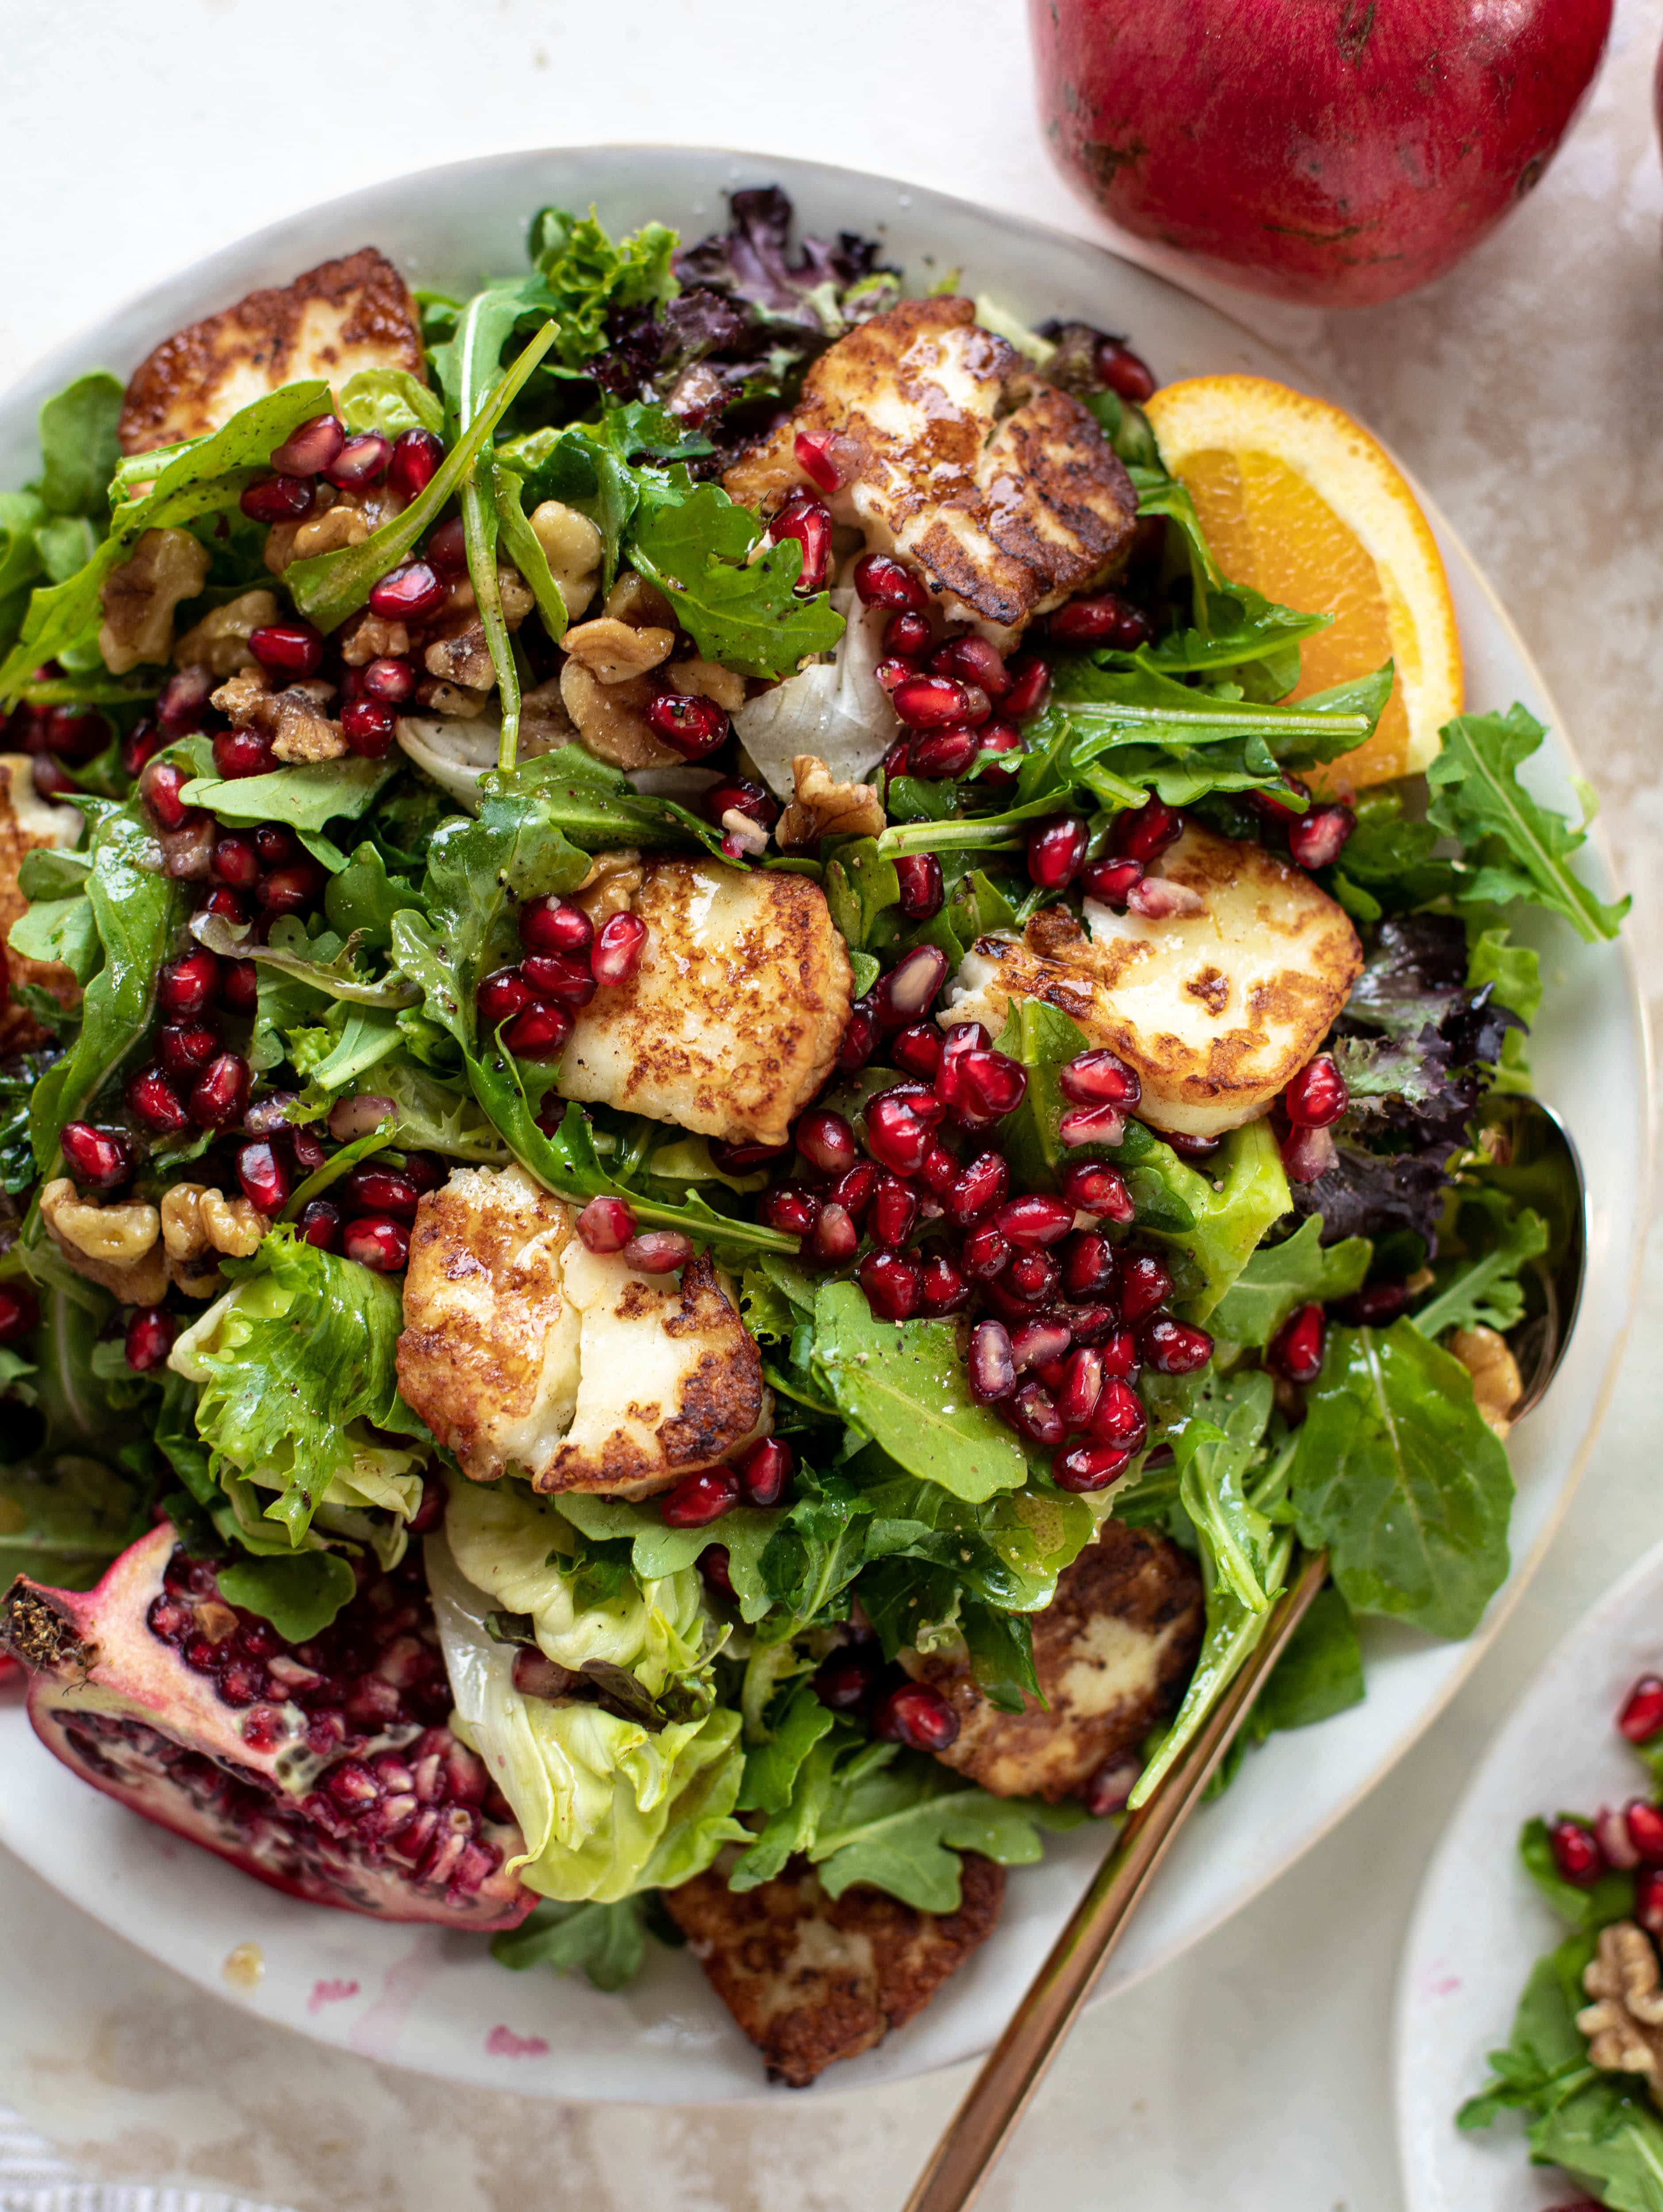 A pomegranate halloumi salad that's the perfect starter to your holiday meal! Drizzle with a spiced orange vinaigrette for the most festive flavor ever.